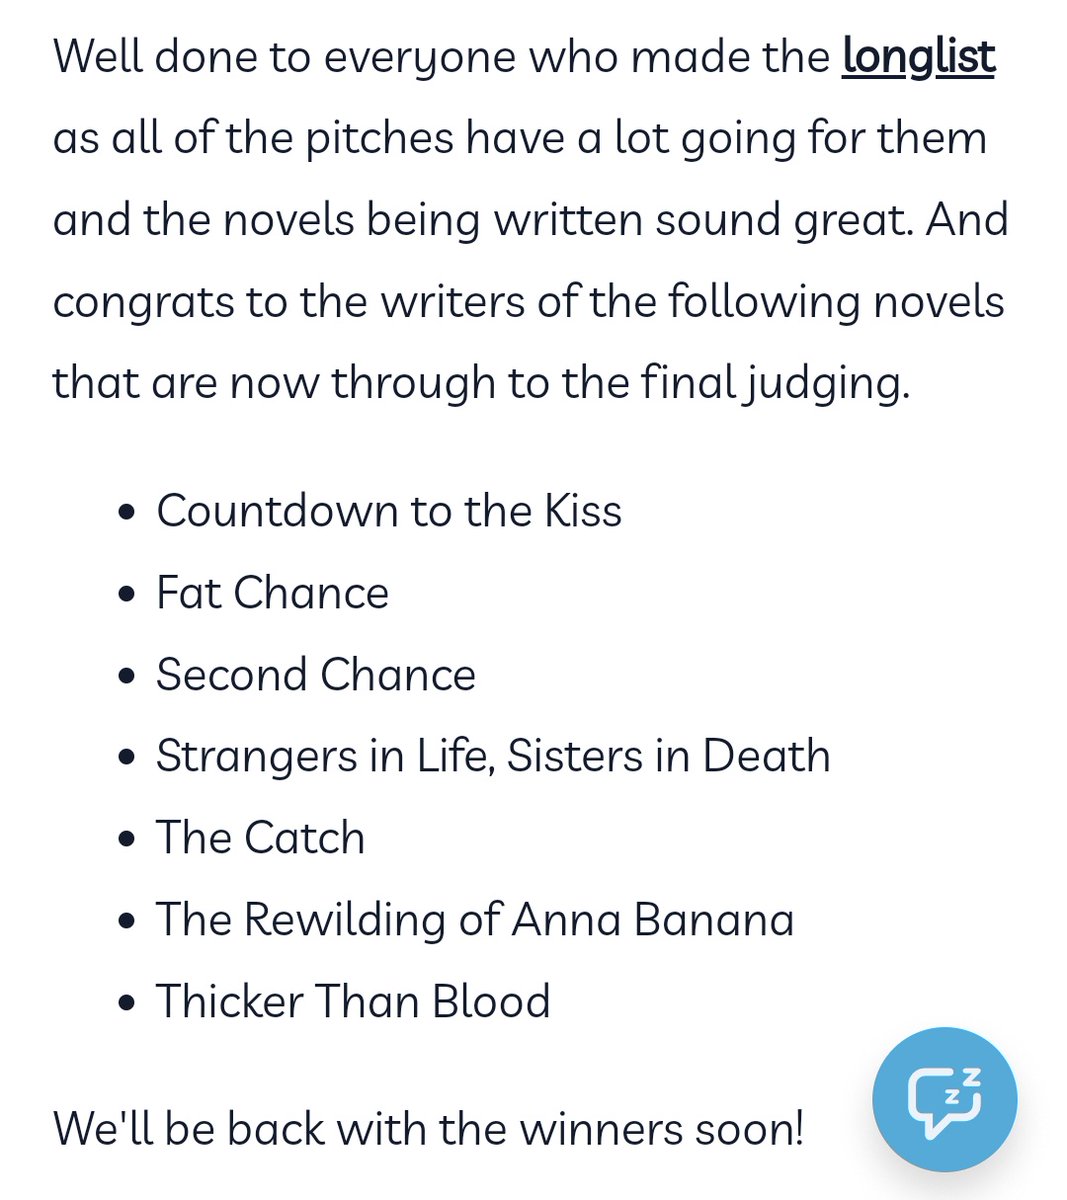 Found out today that my pitch for an adult Thriller has been shortlisted for the Retreat West Pitch to Win competition 🎉🎉🎉 #writerslife #writing